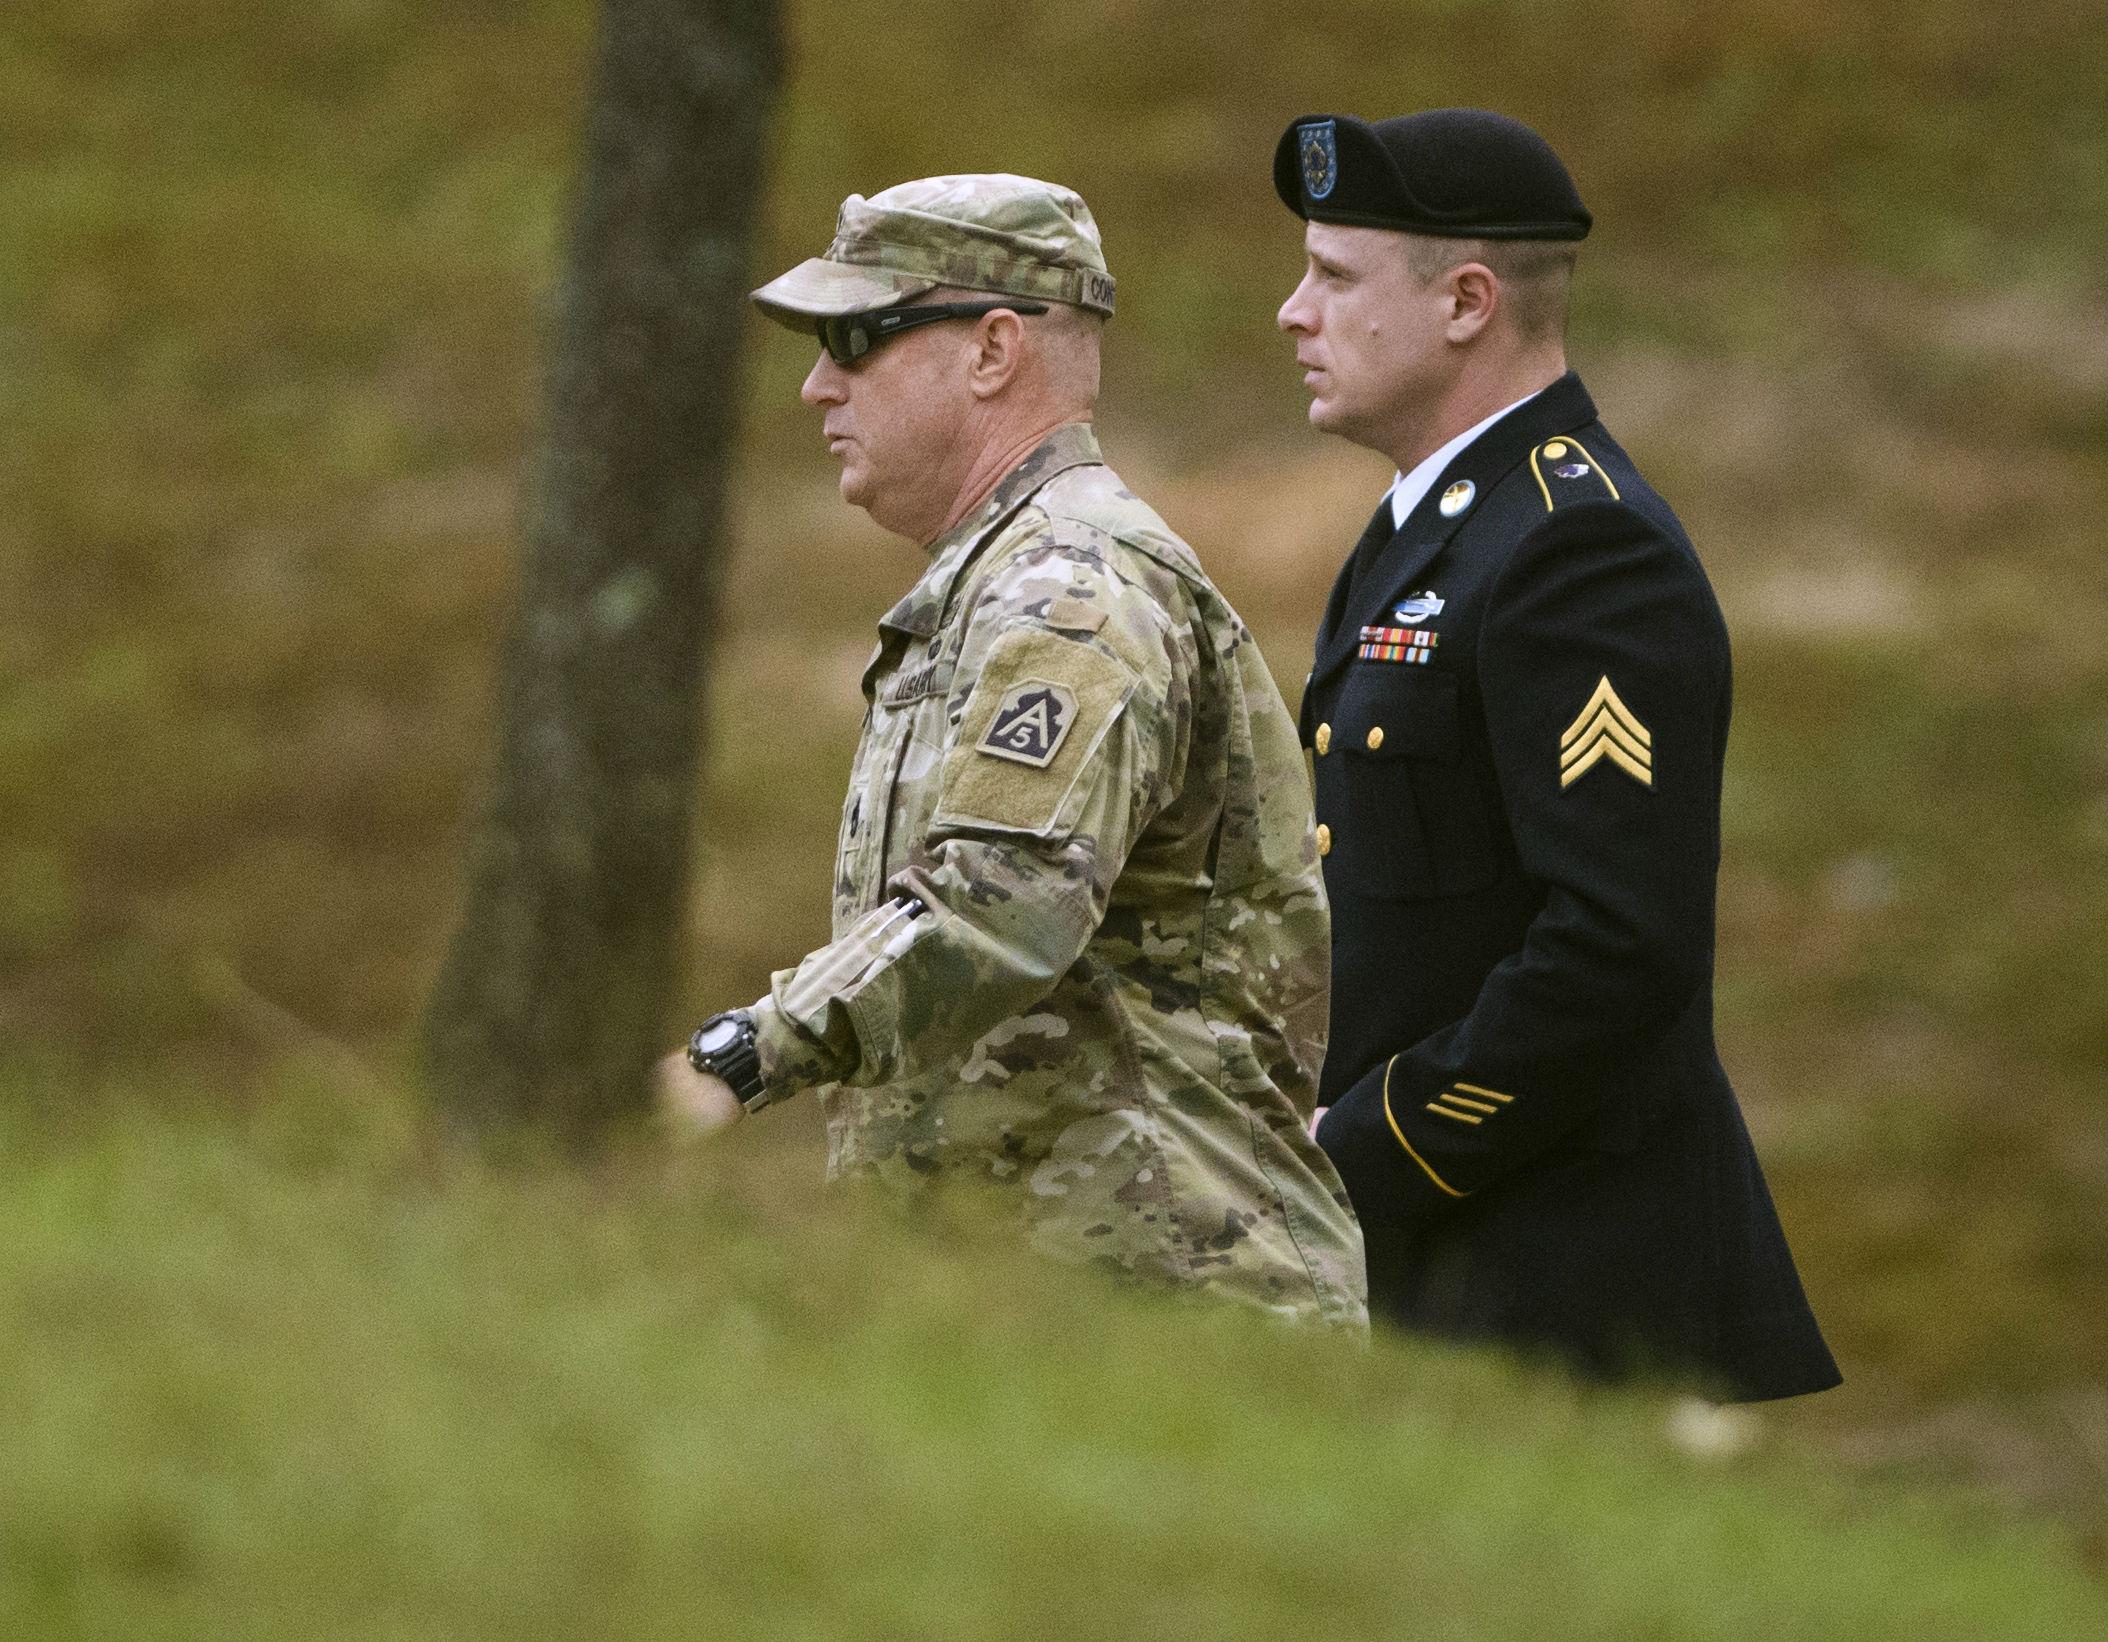 Bergdahl could be sentenced to life in prison